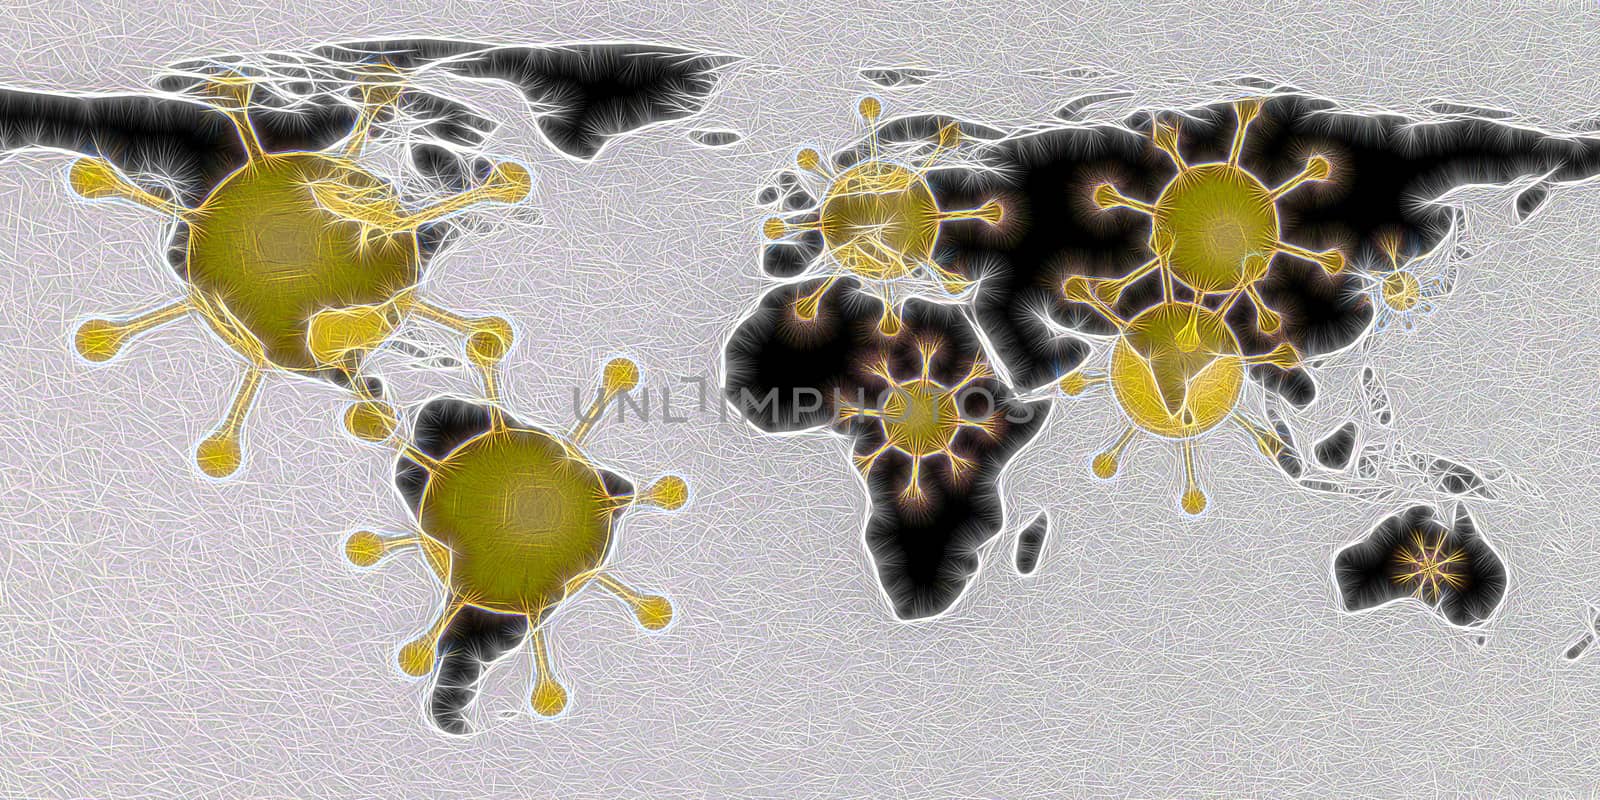 3D-Illustration of a world map showing corona virus hotspots in the USA, Brazil, India, Europe and russia with a medical protection mask